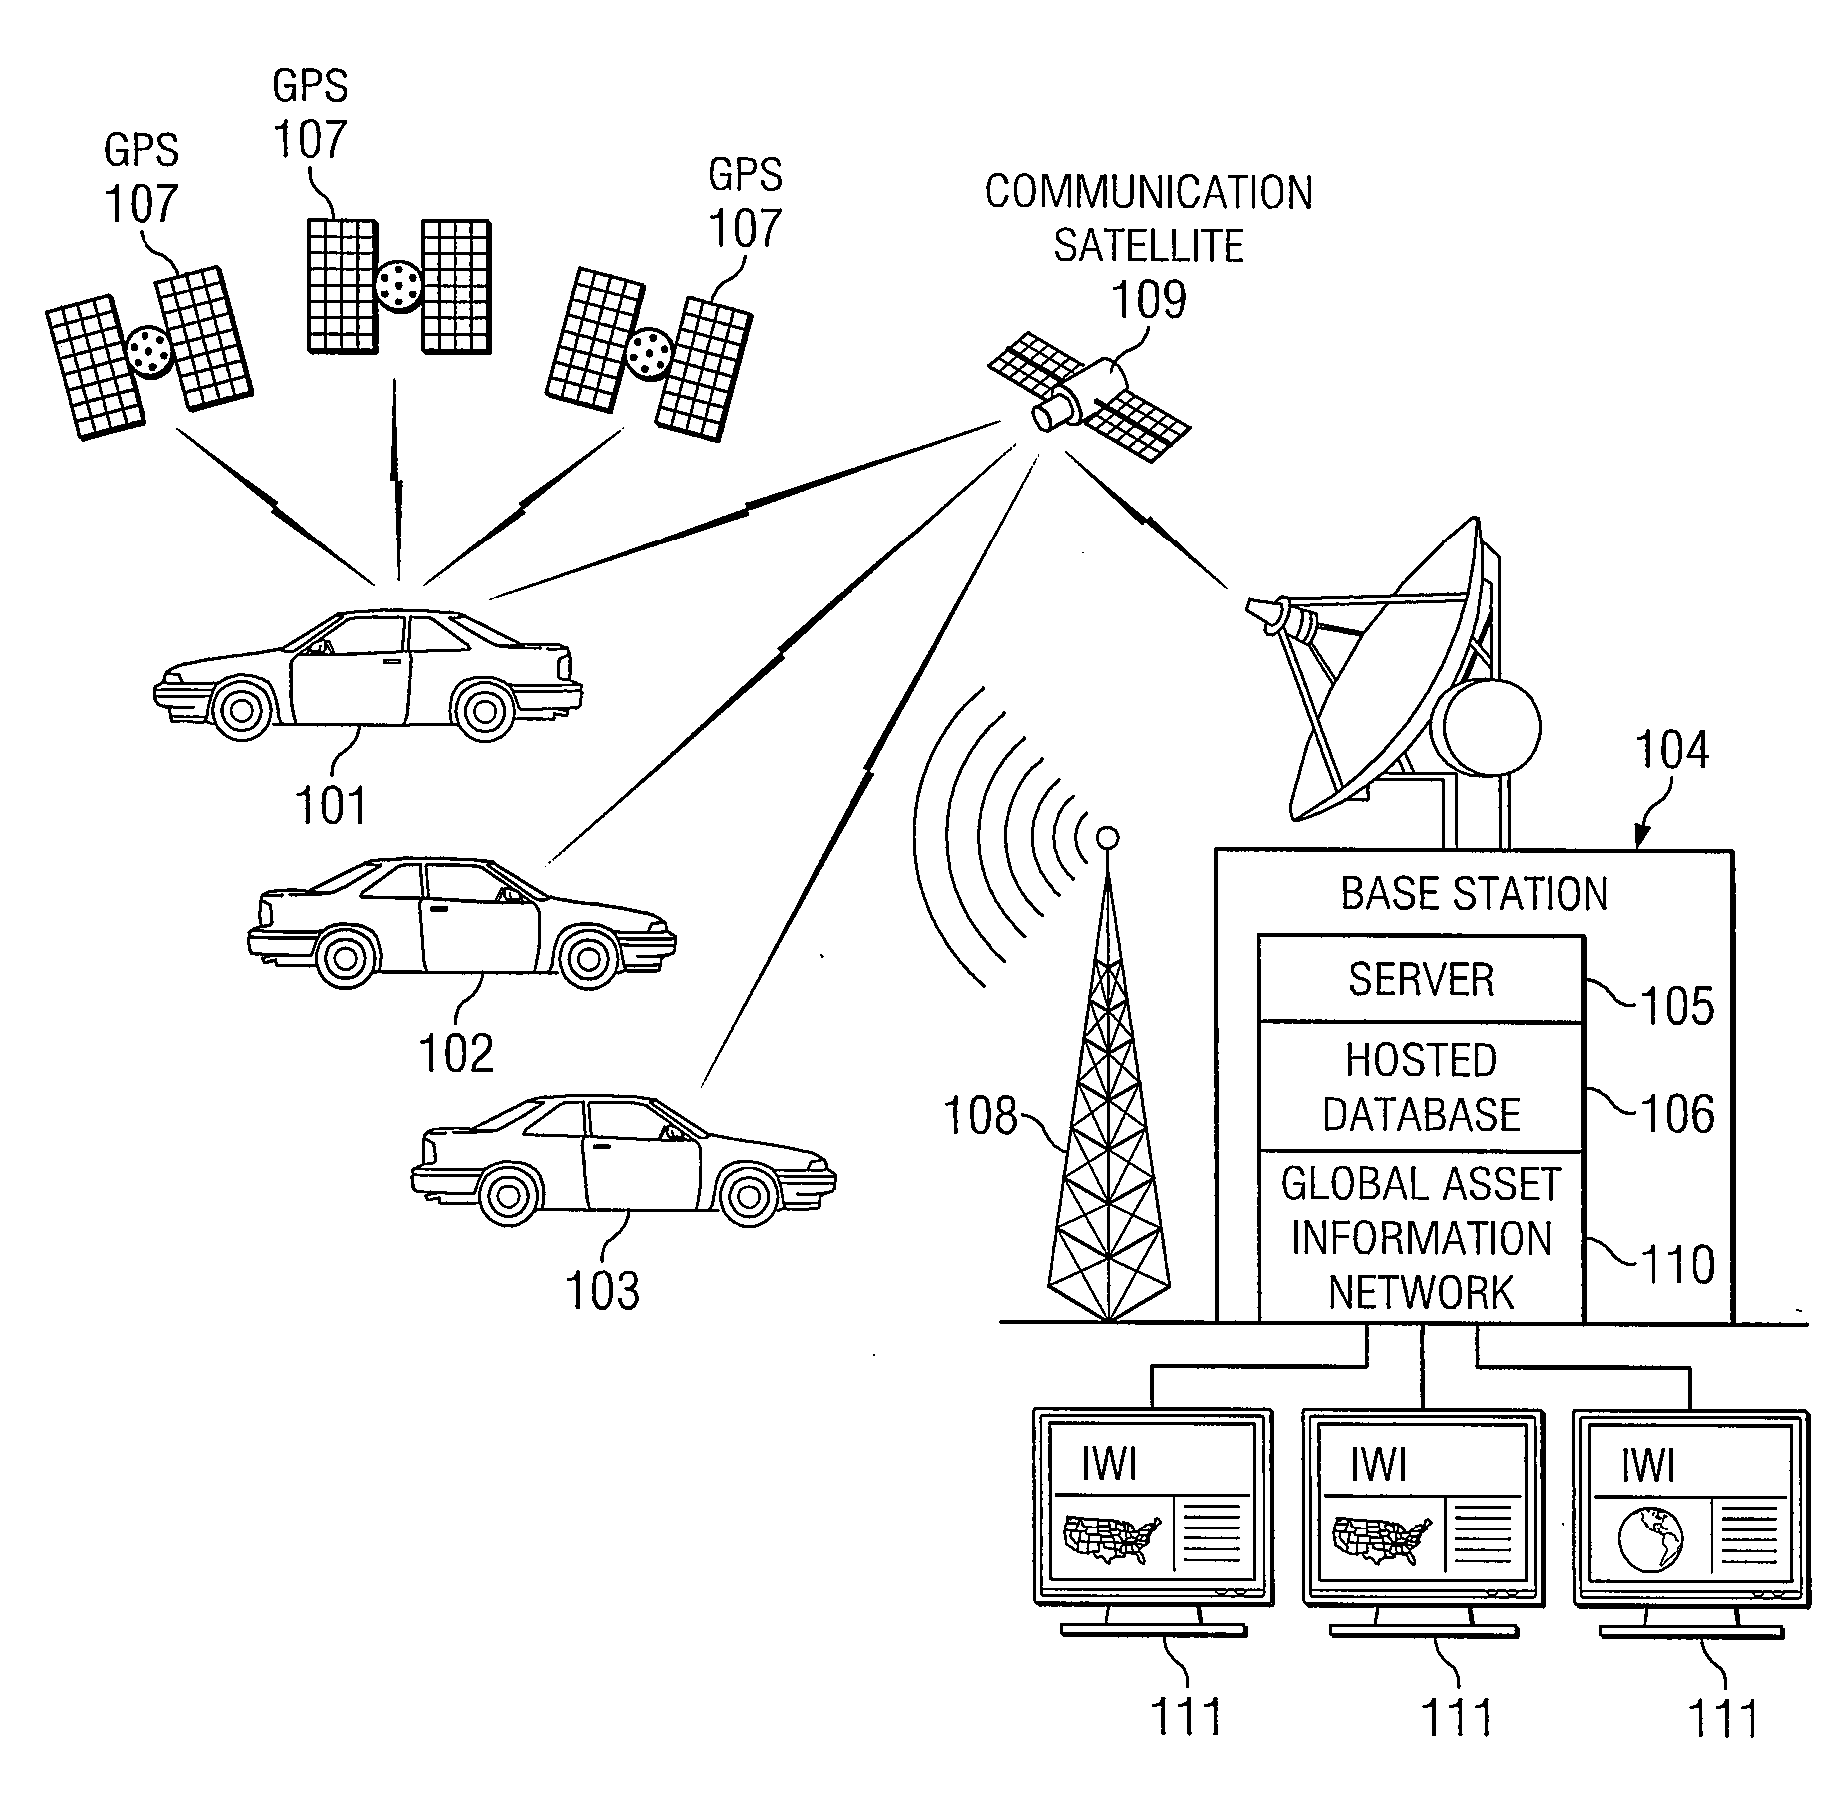 System and Method for Detecting and Reporting Vehicle Damage